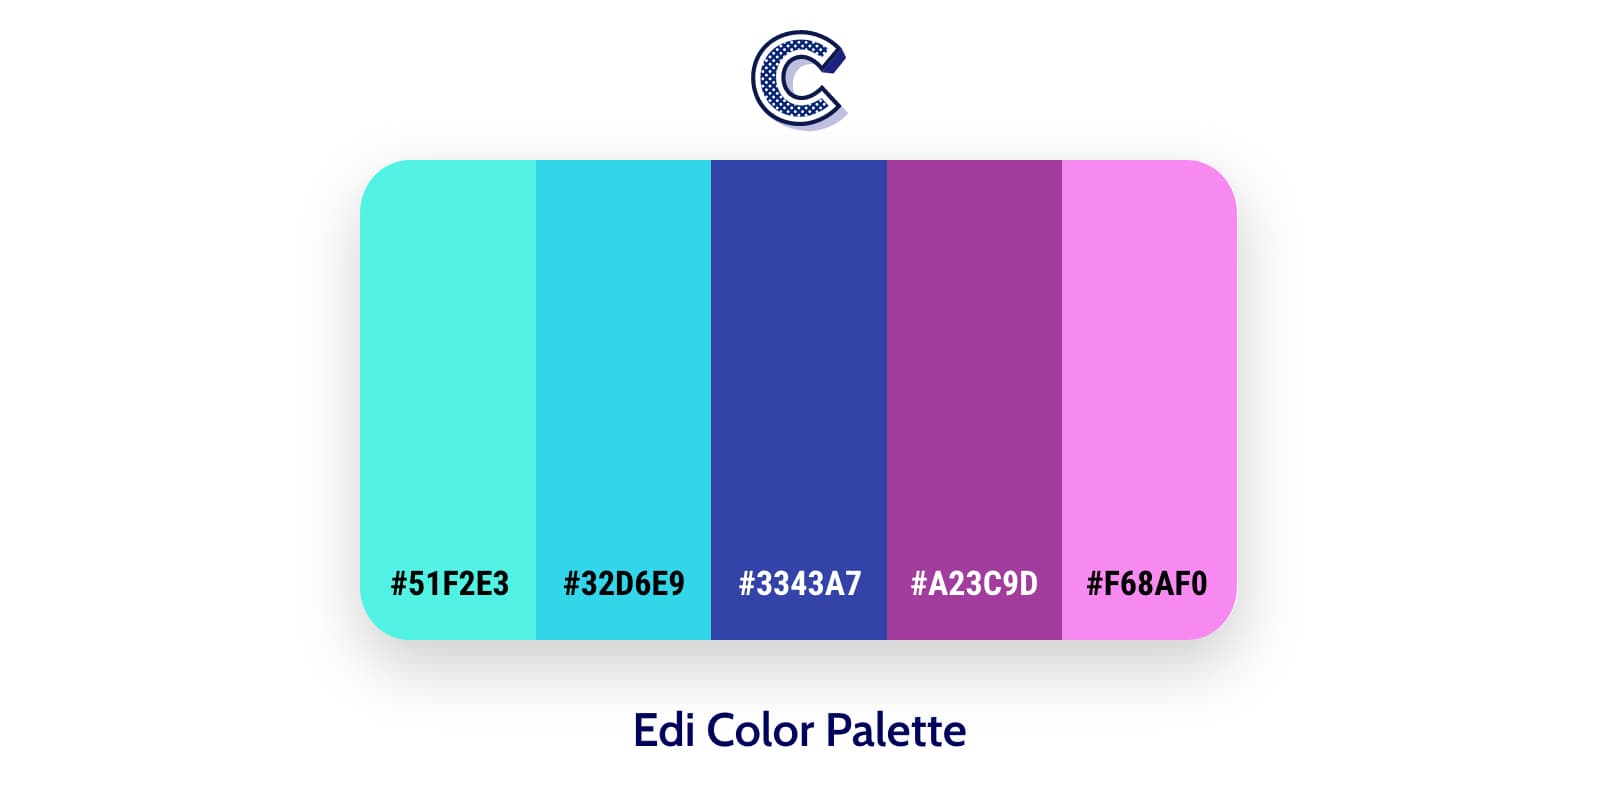 the featured image of edi color palette